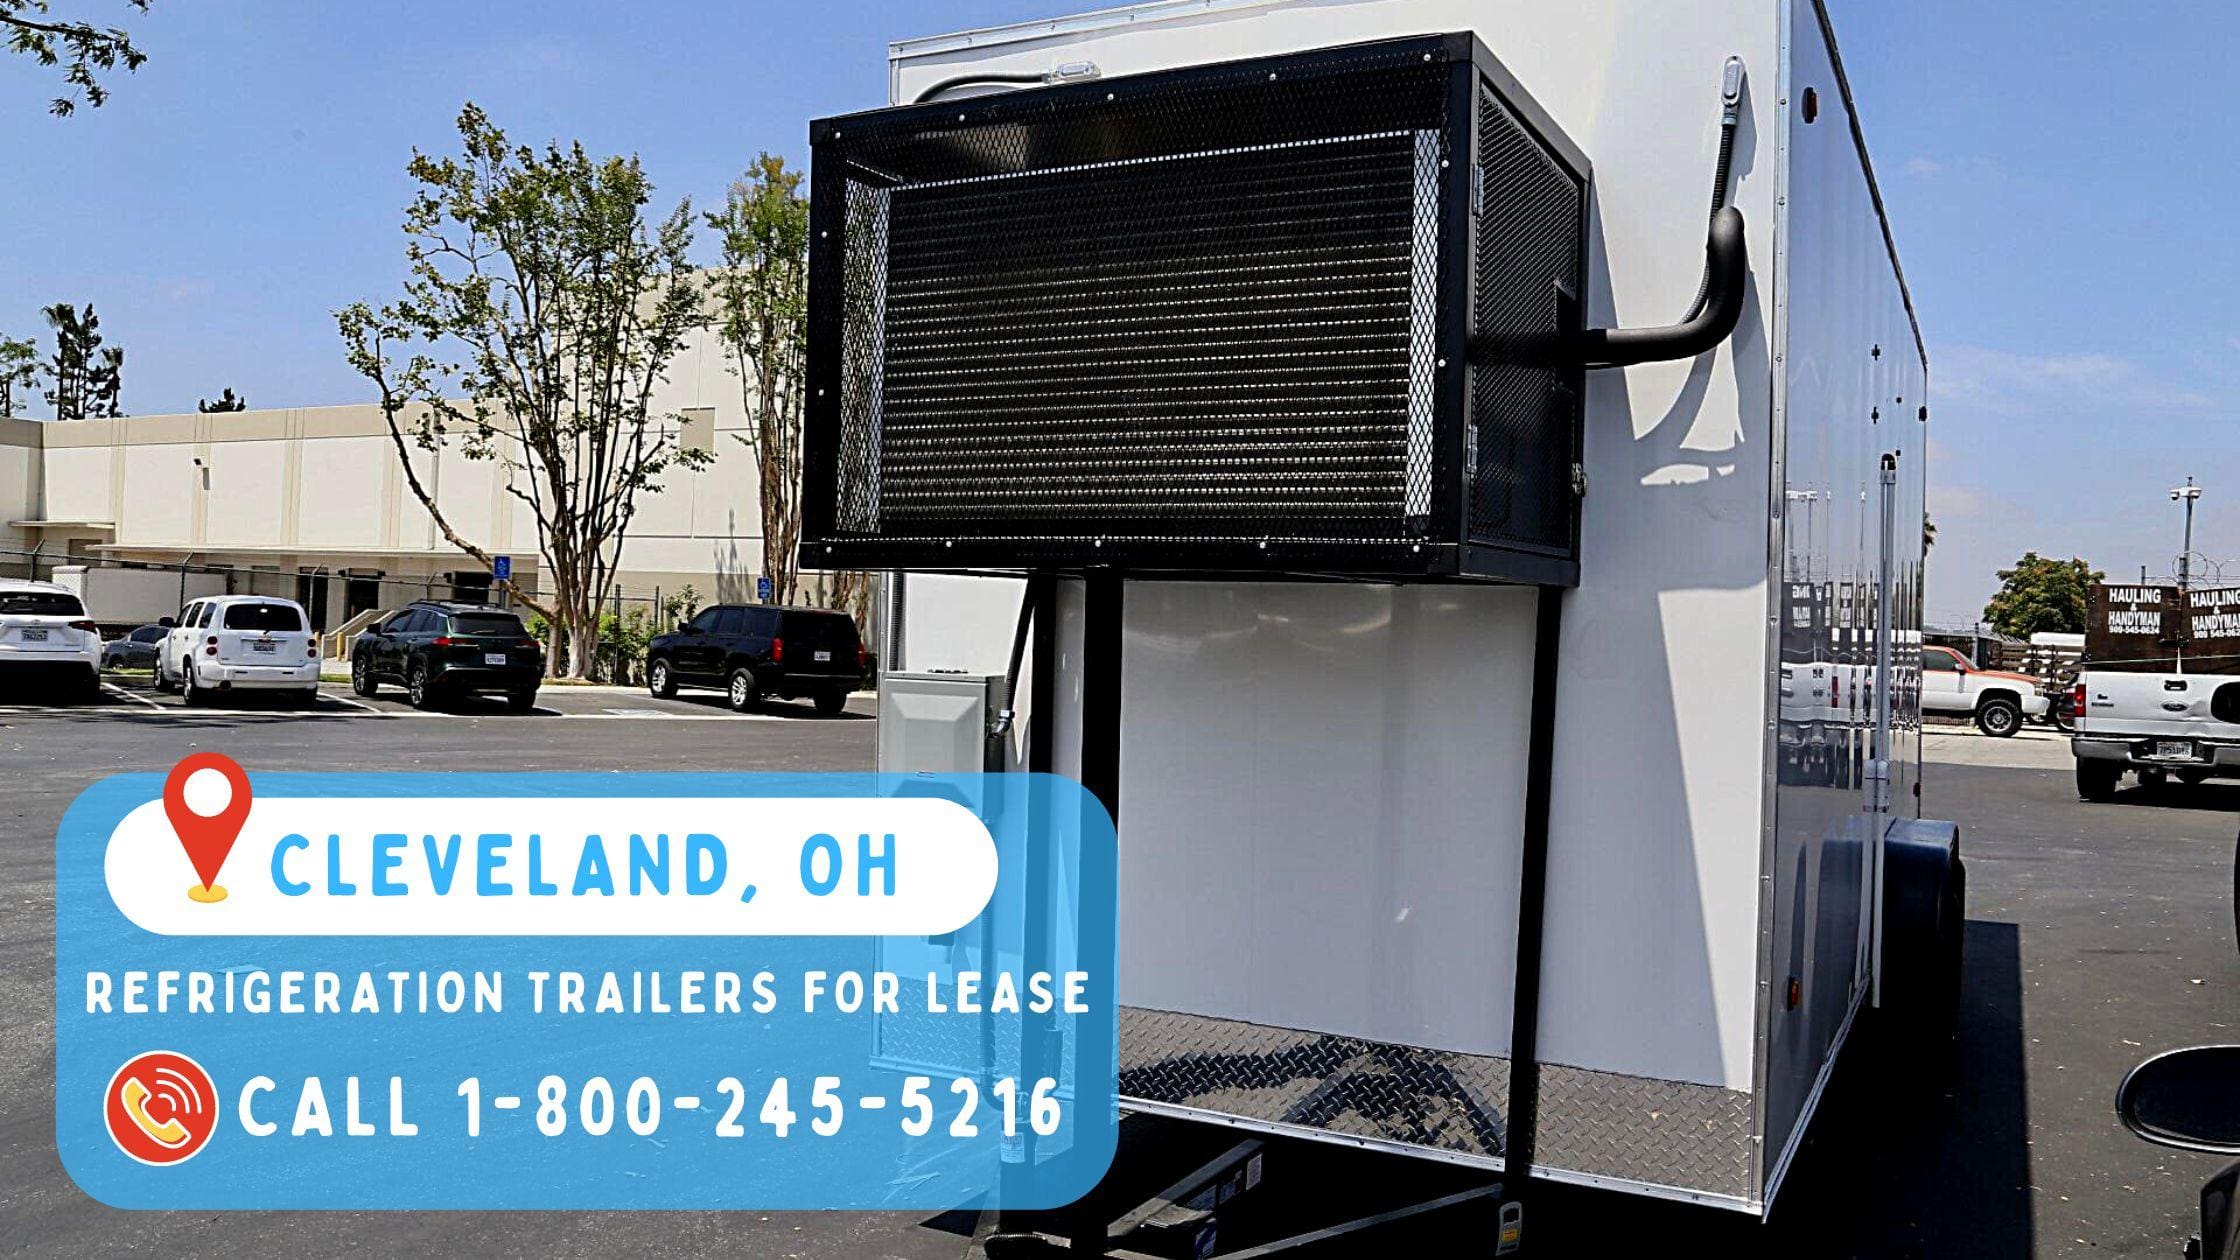 Refrigeration Trailers for Lease in Cleveland, OH